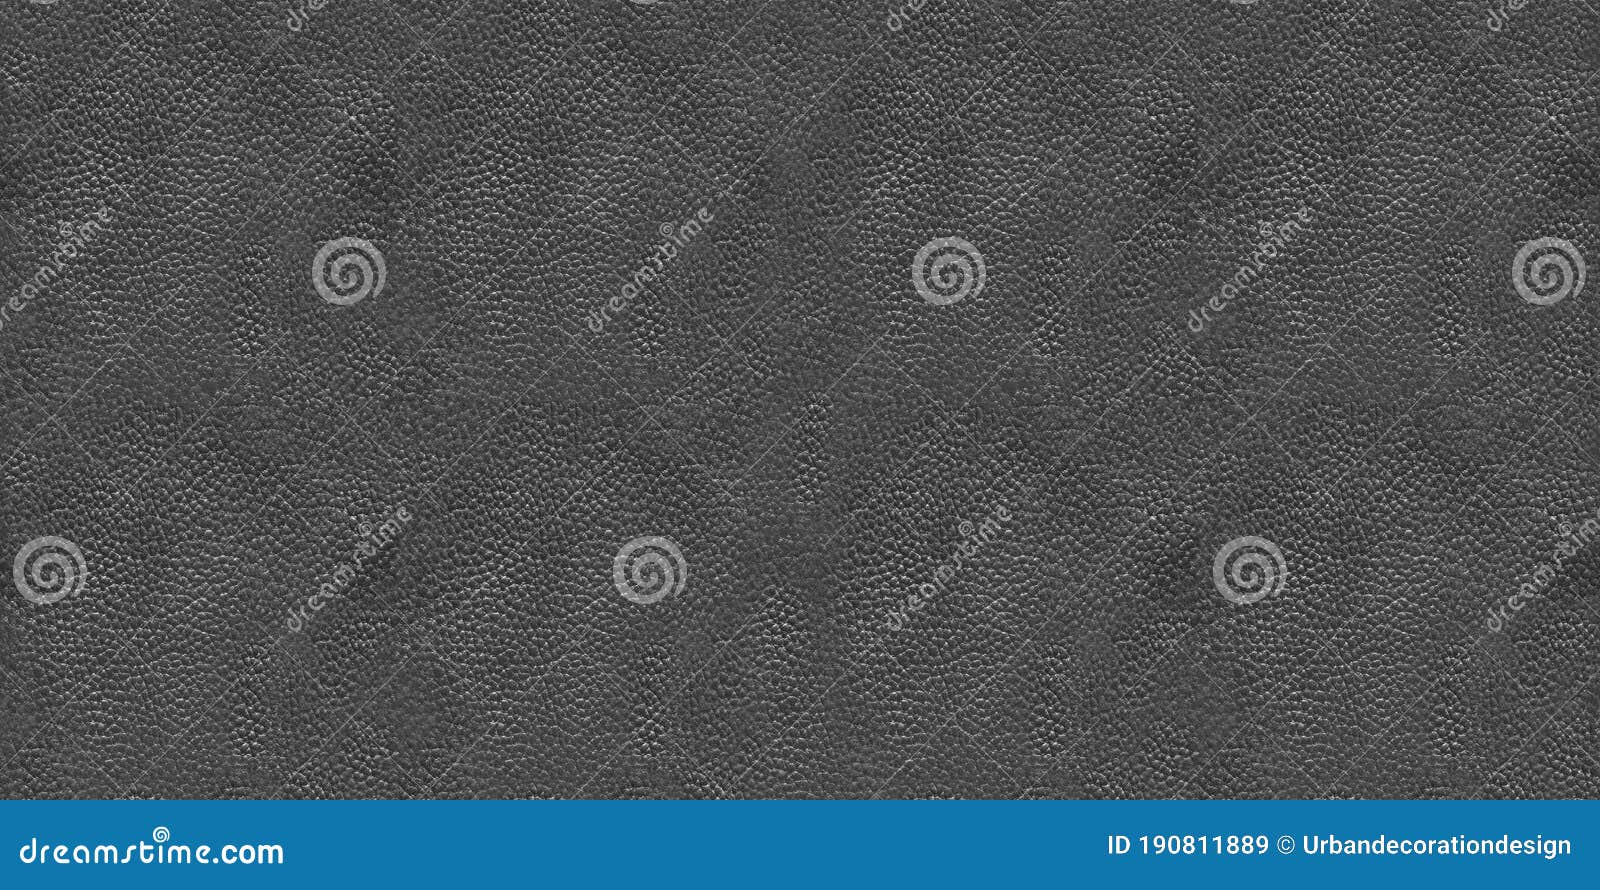 black colored leathers background textures s.